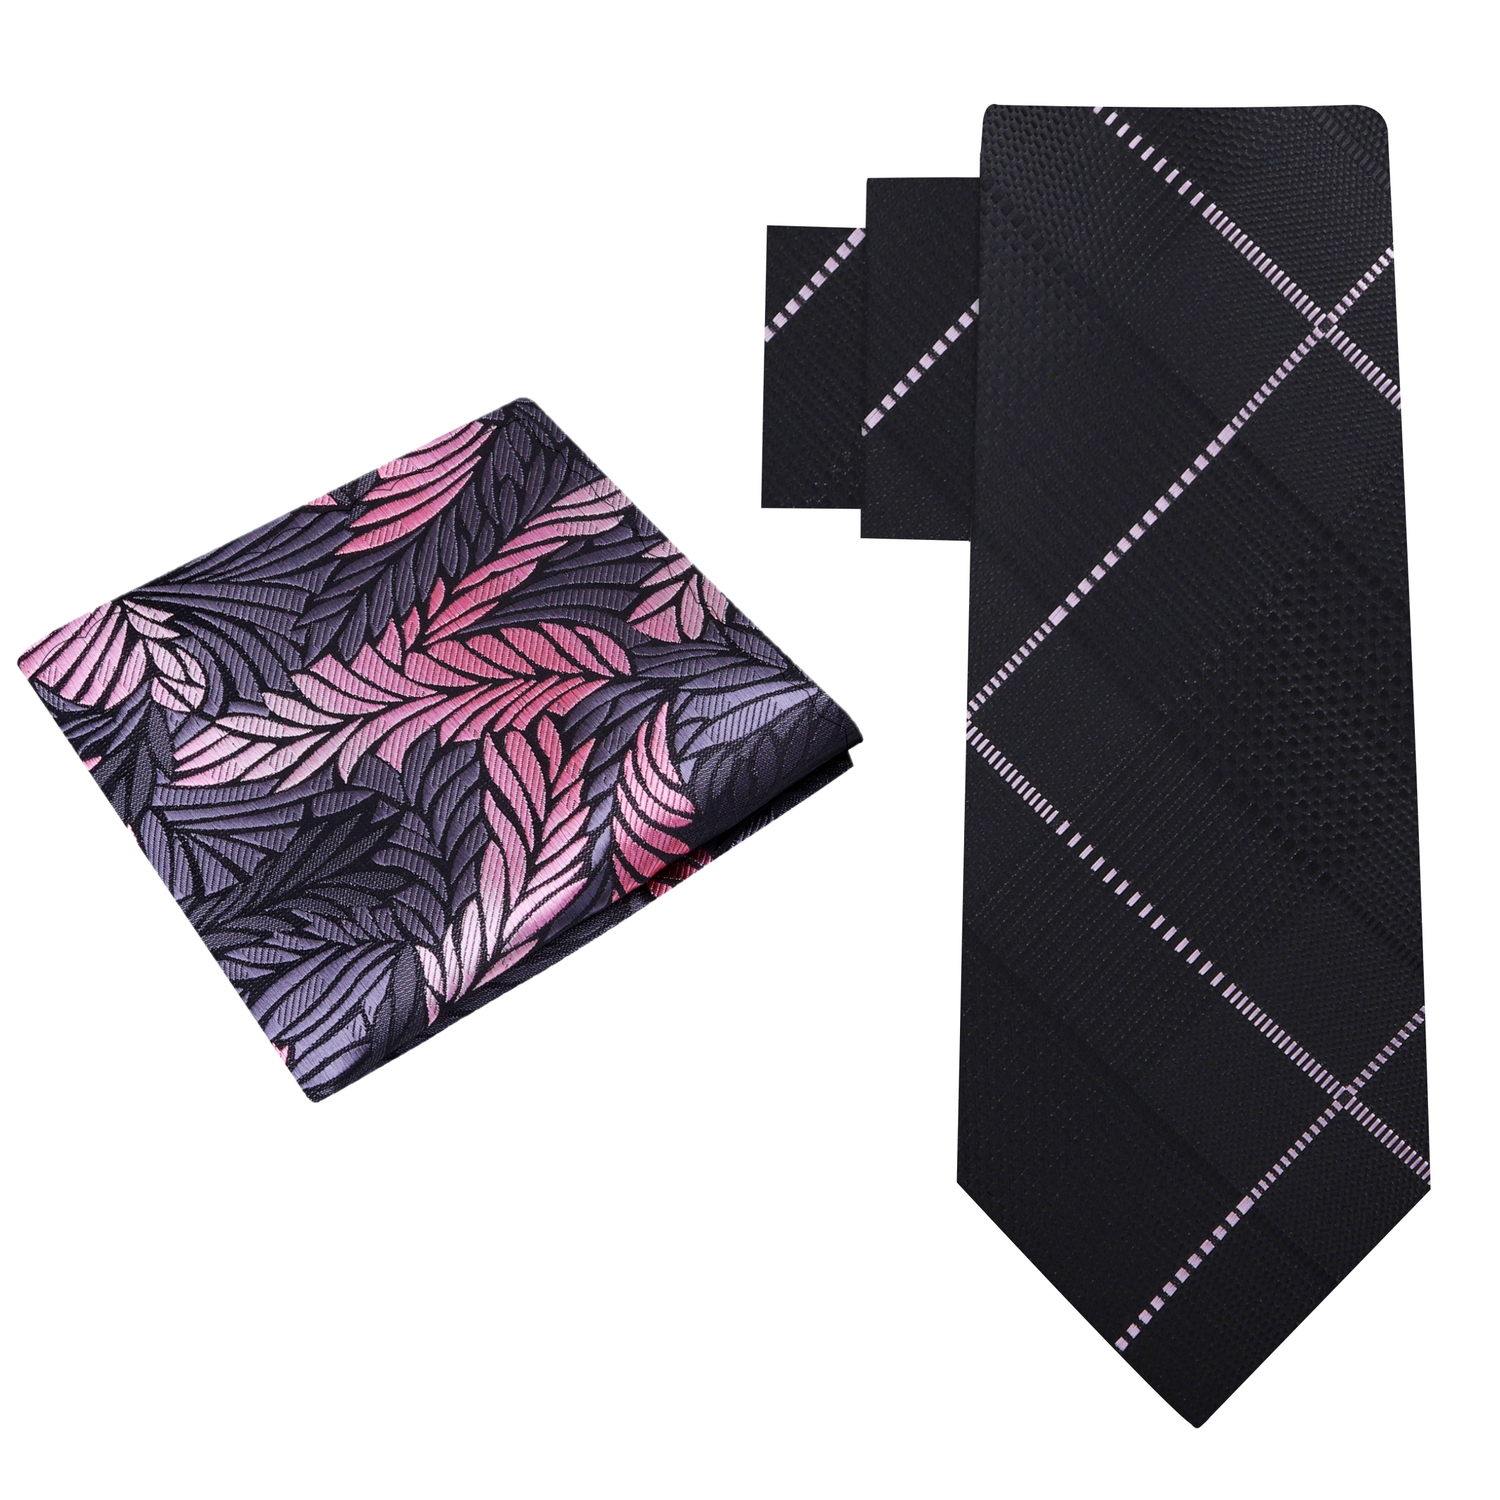 Alt View: Black, Pink Plaid Tie and Grey, Pink Feather Square